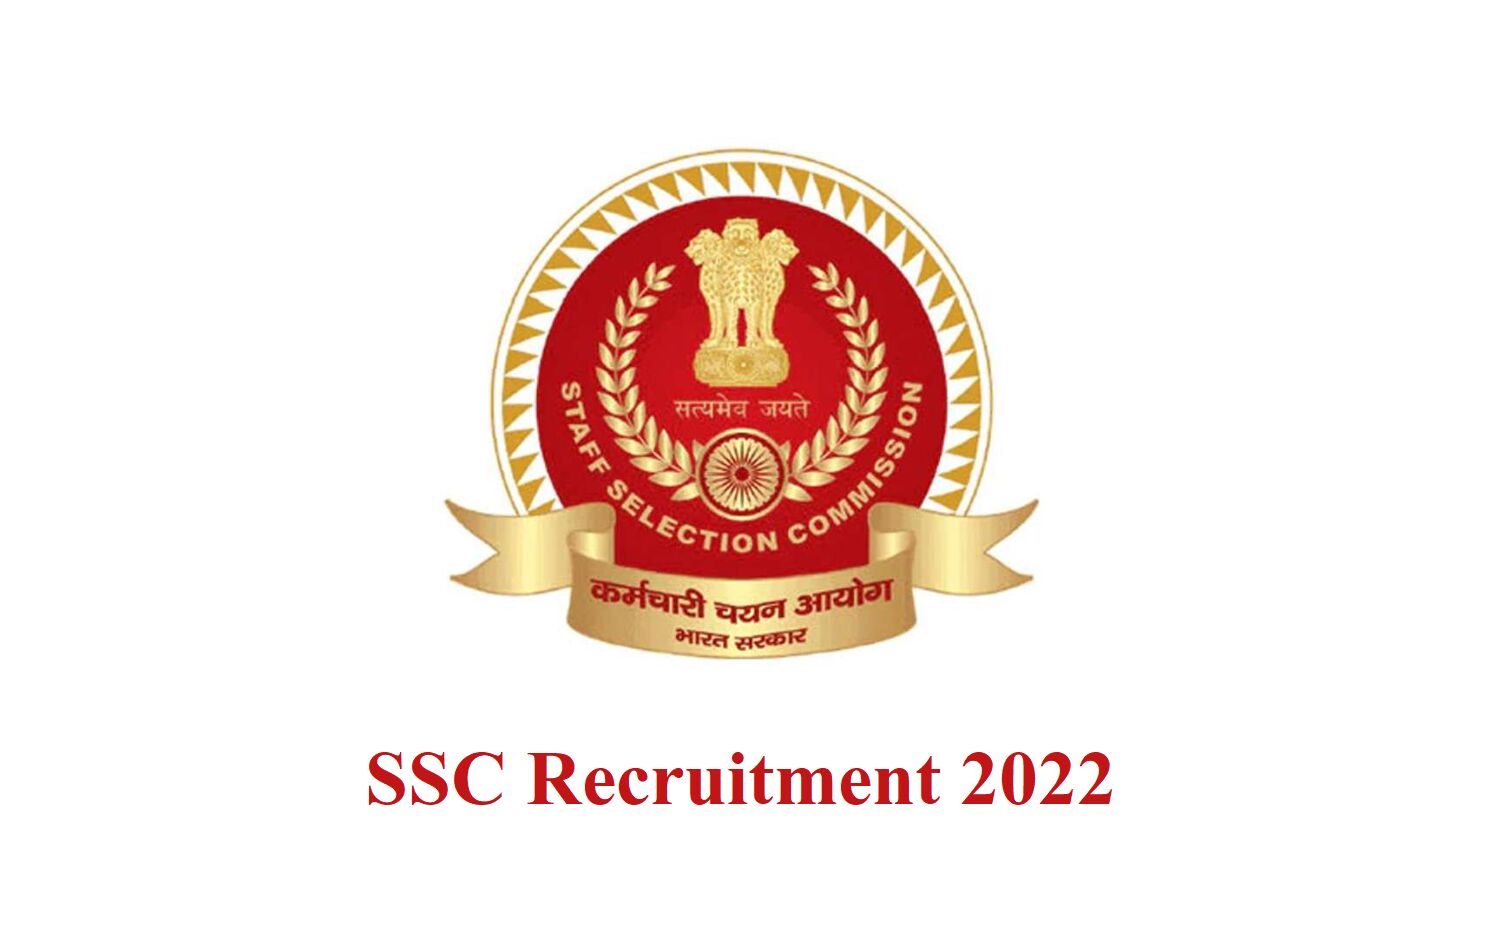 Bumper vacancy in SSC, apply for graduate pass